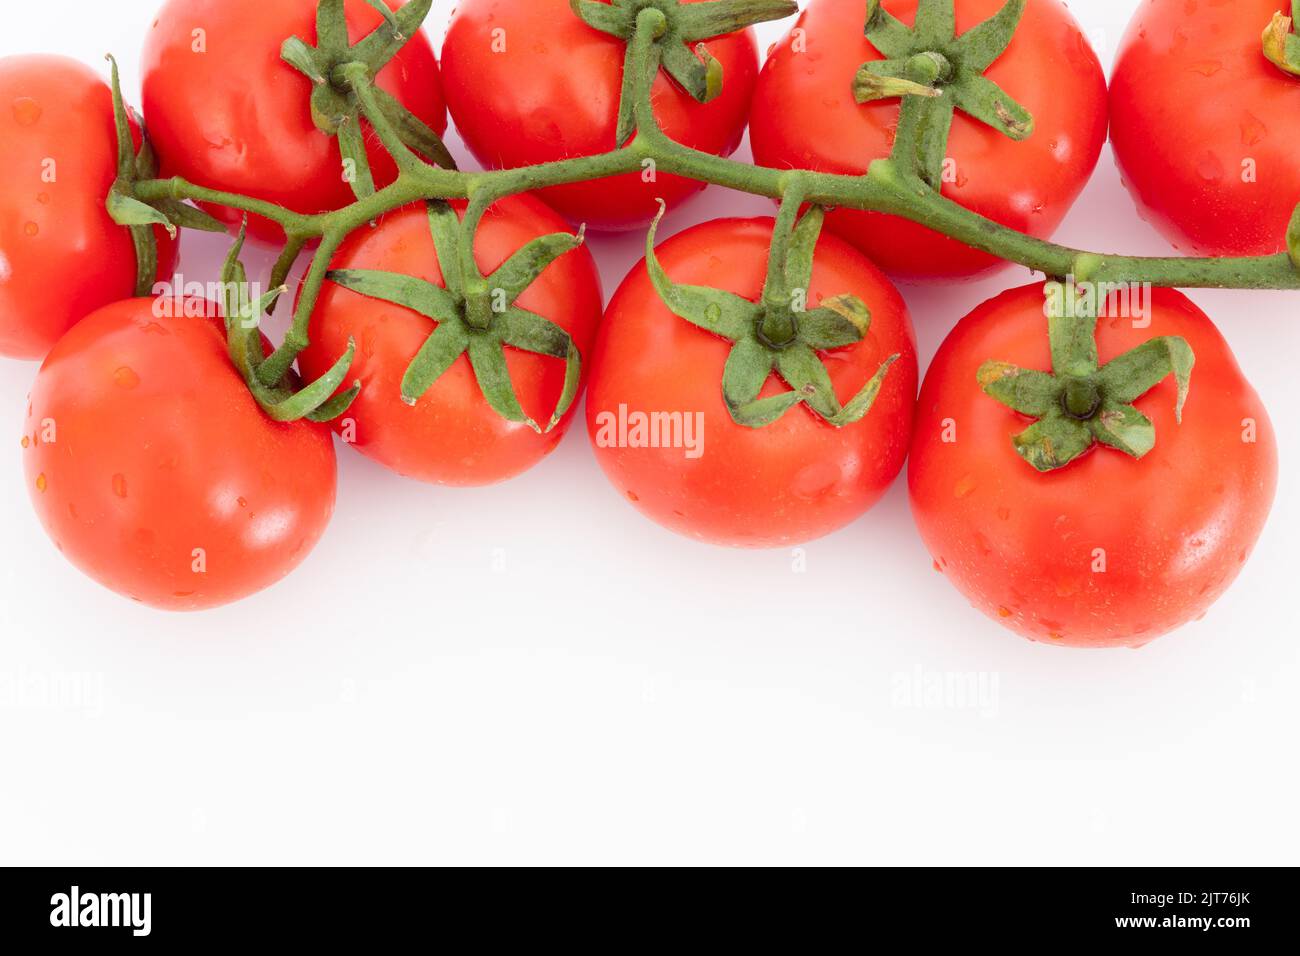 Fresh vegetable, red cherry tomato isolated on white background, food concept, copy space. Stock Photo